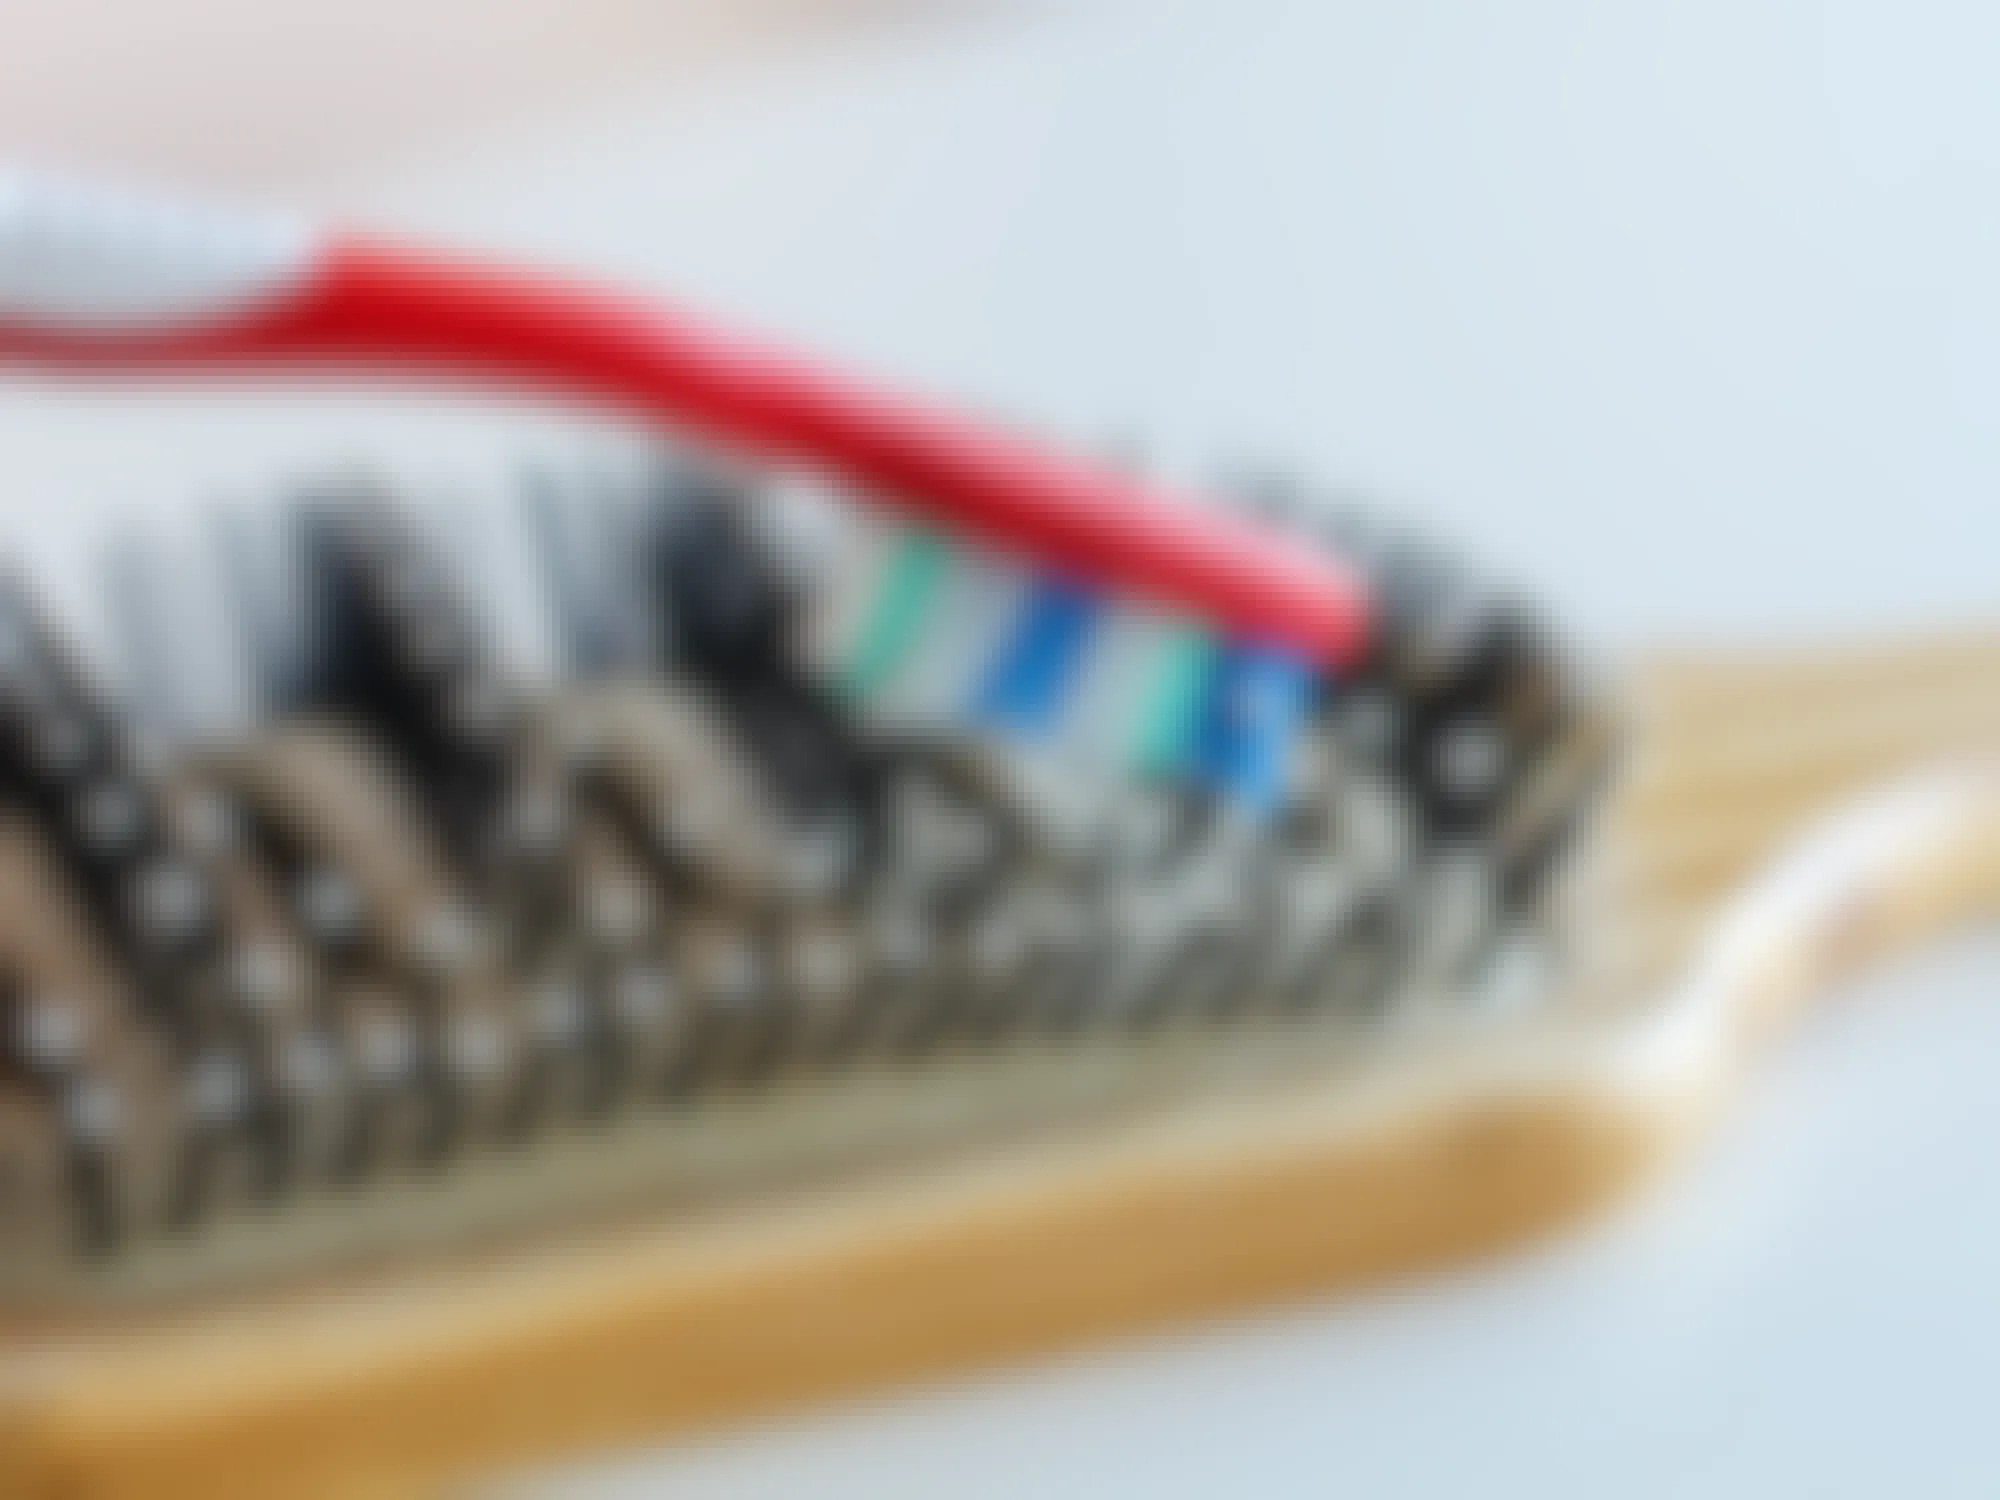 a toothbrush cleaning the bristles of a wooden hairbrush